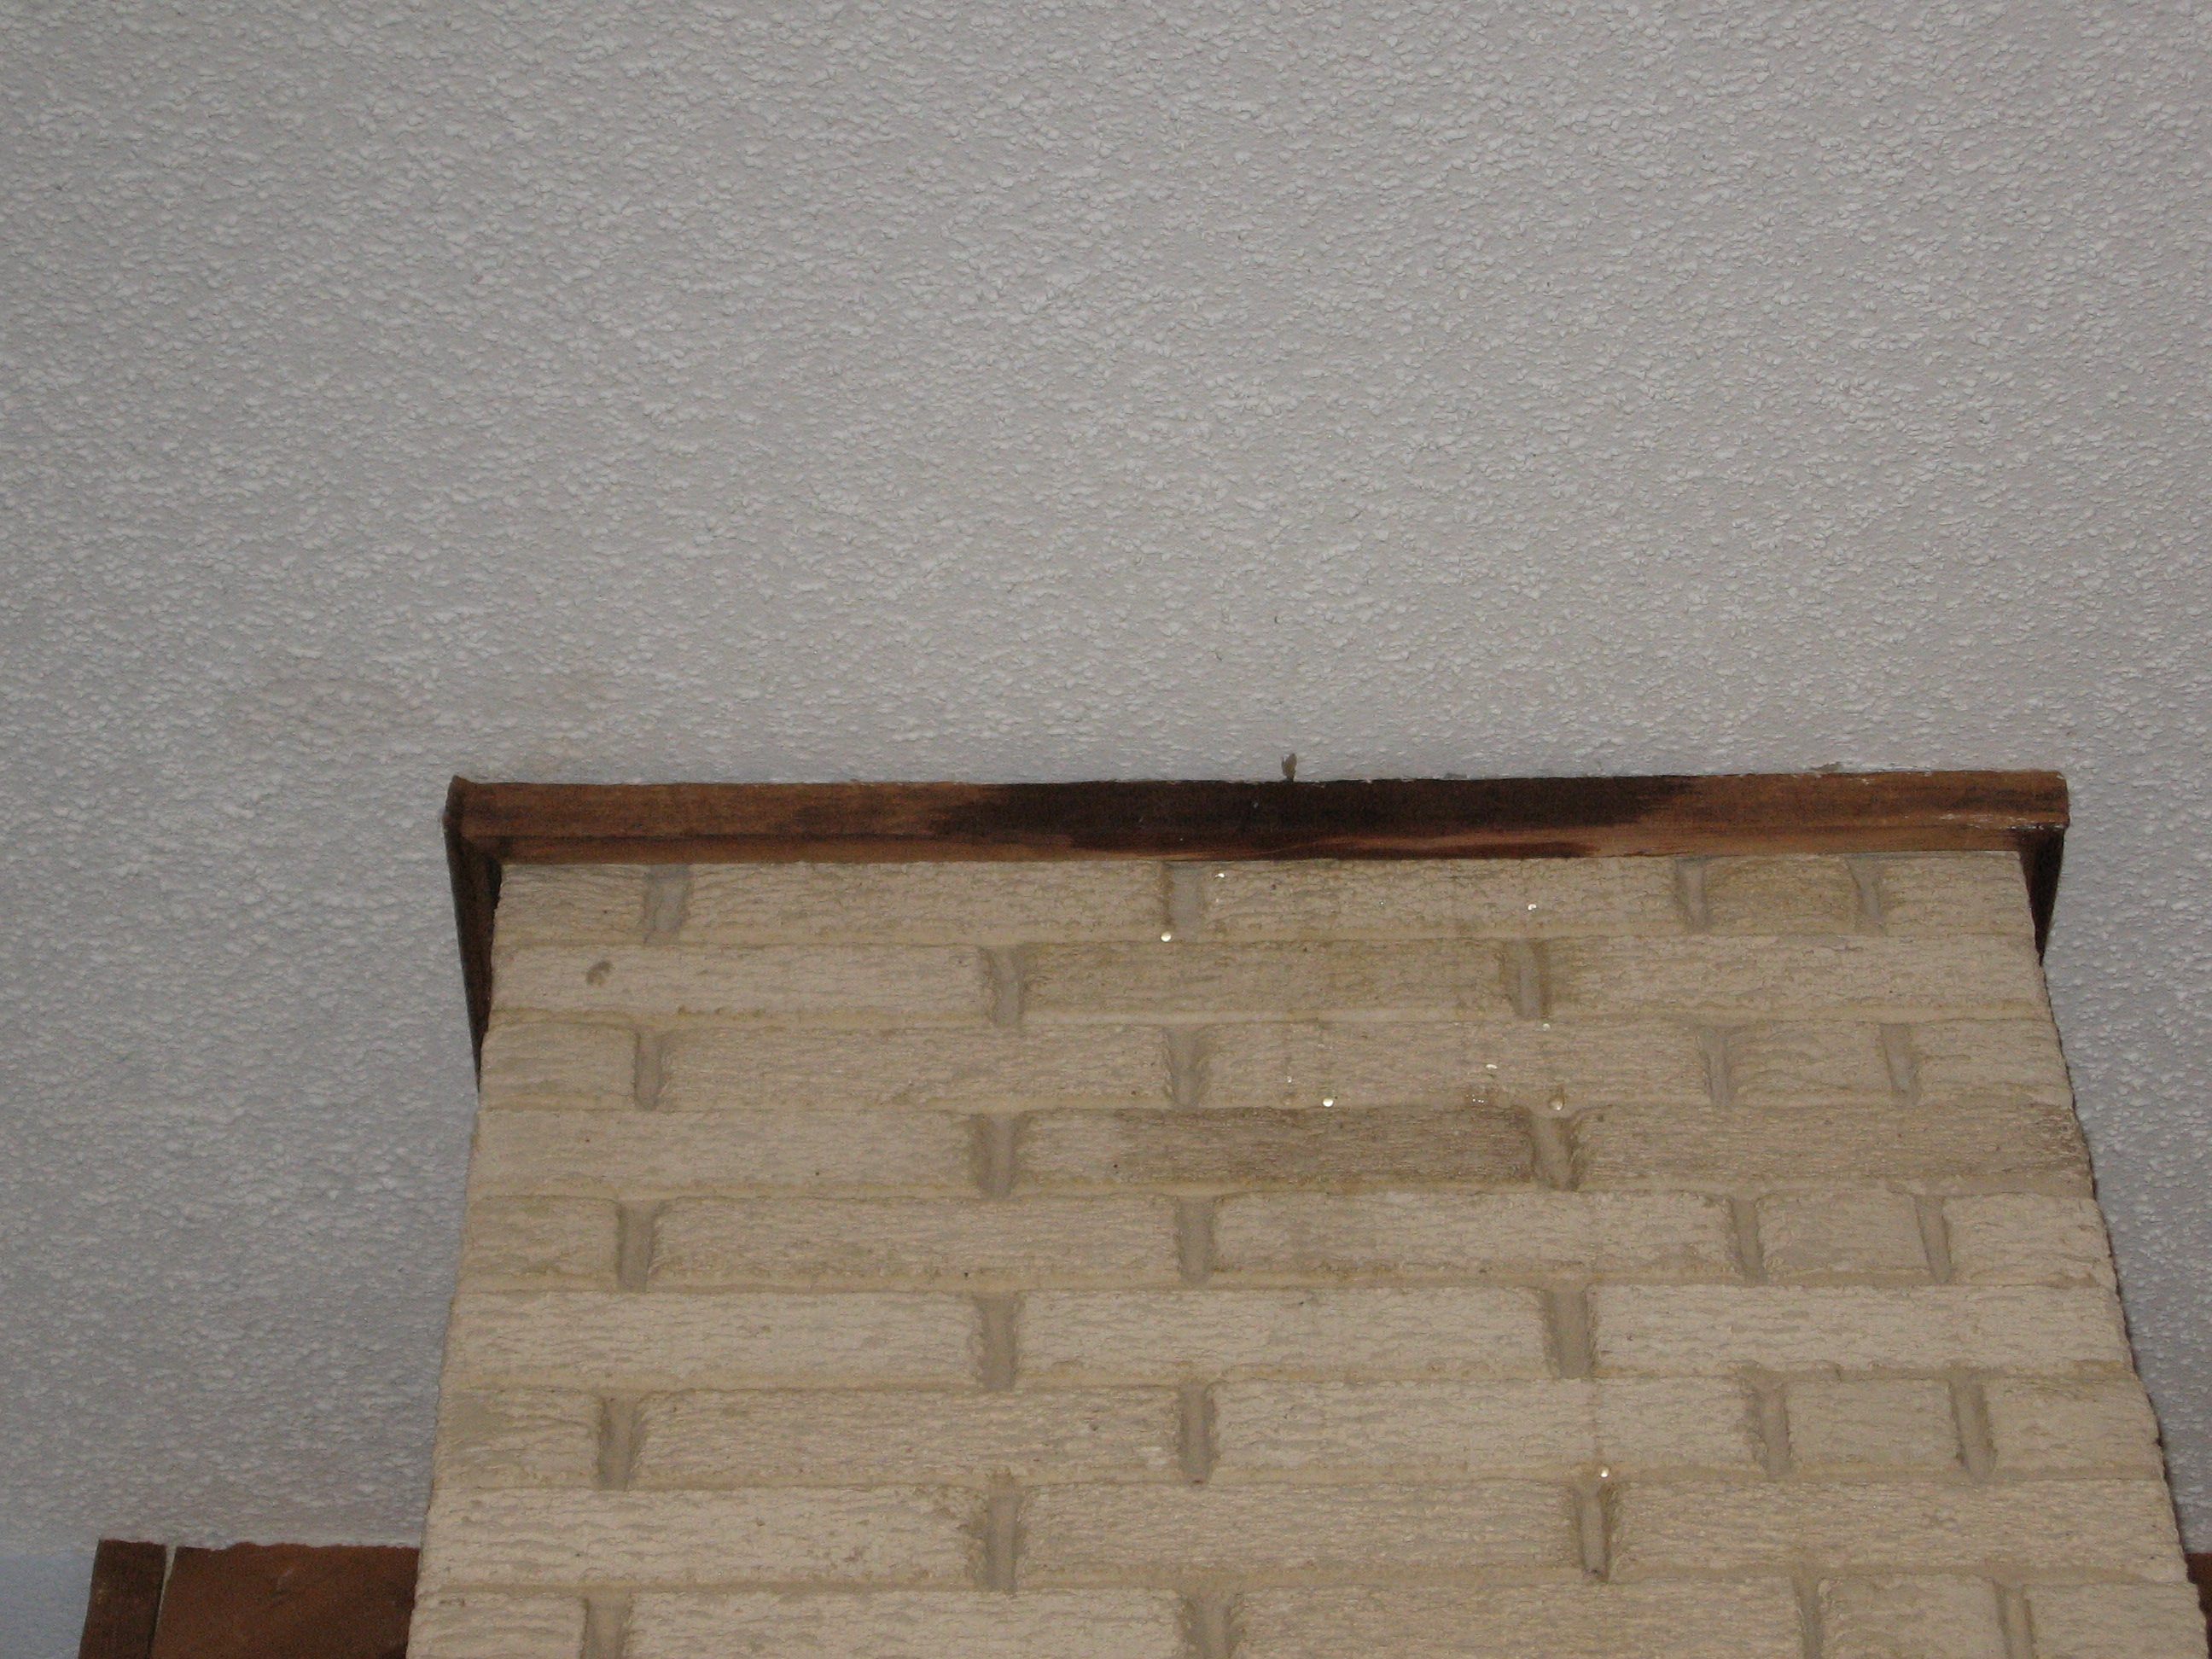 roof leak into the home (centered east side)